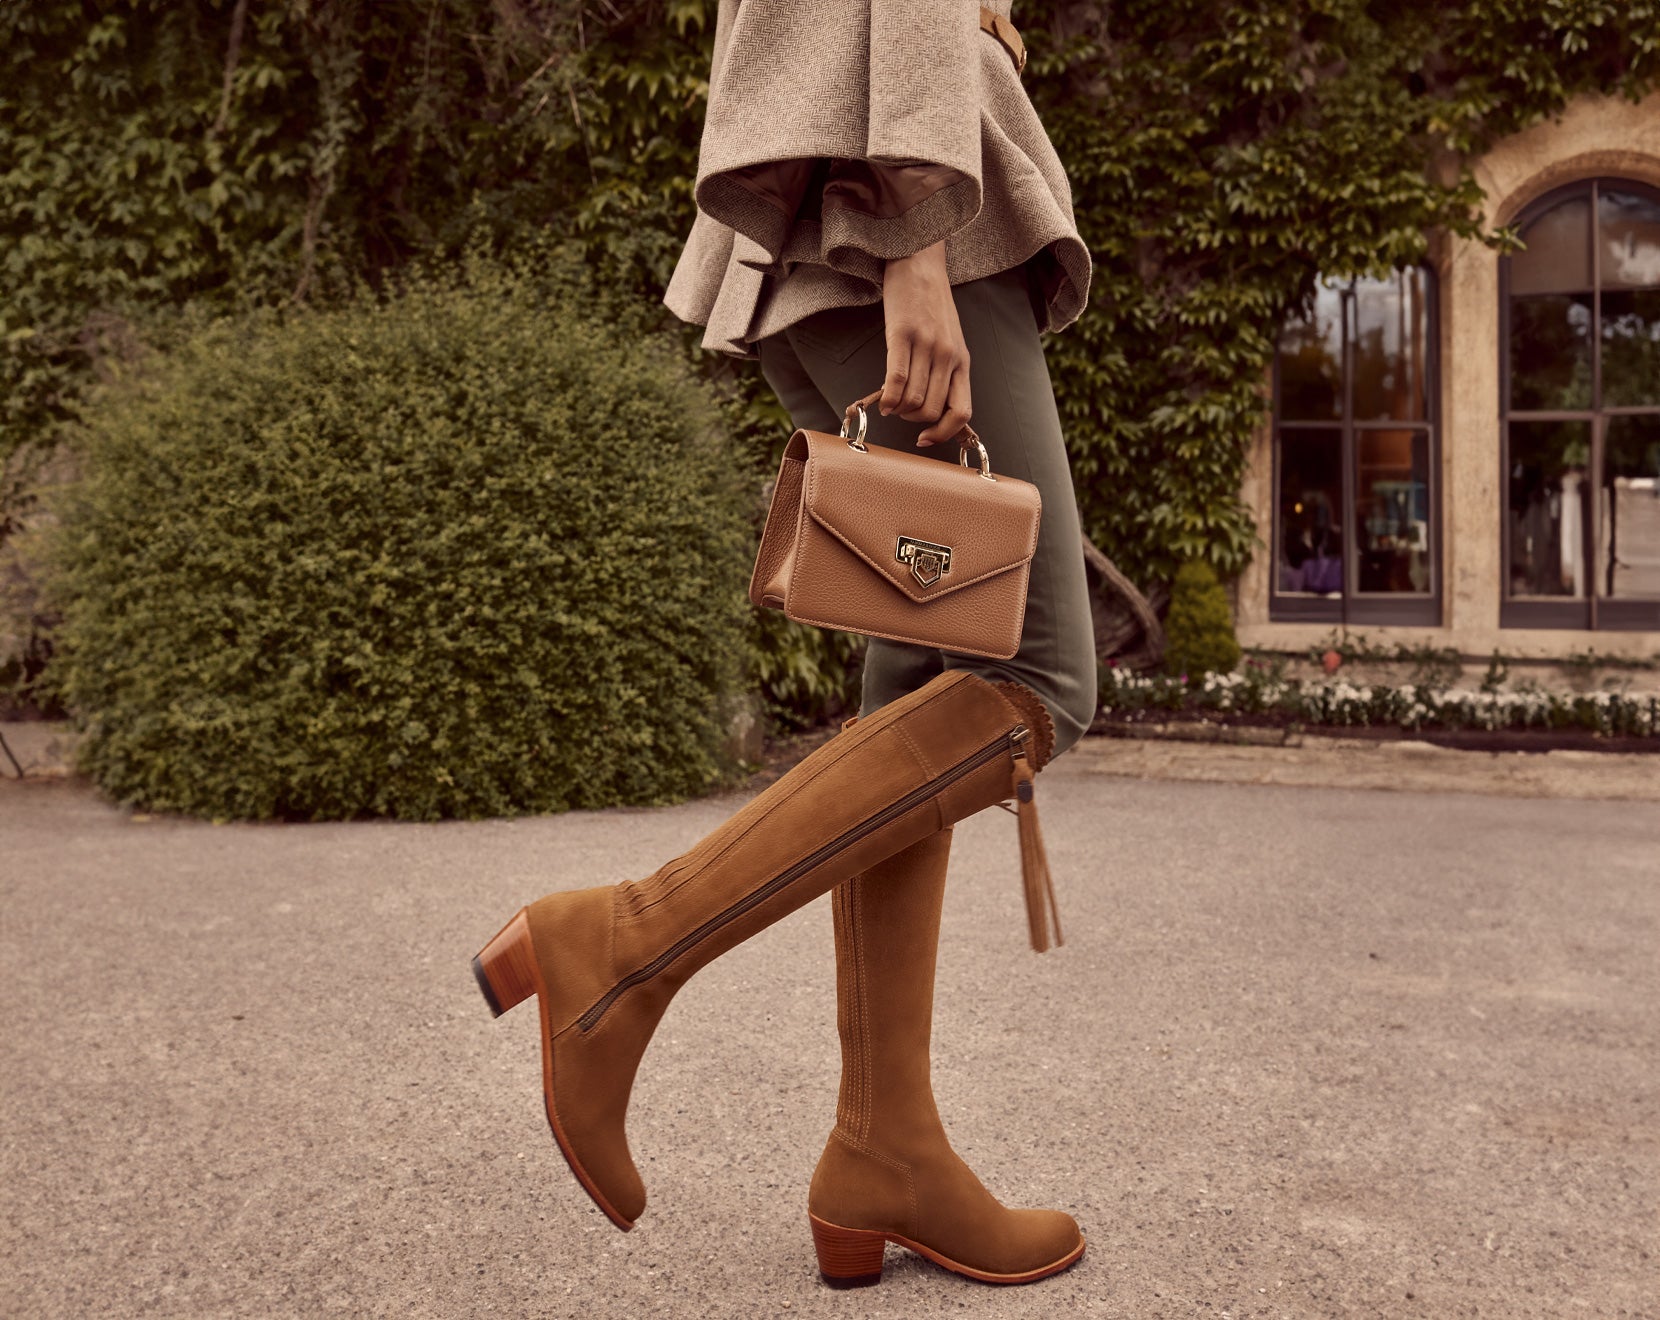 The Model is wearing the Sienna cape in taupe, the Mini loxley in tan leather and the heeled Regina boot in tan suede, looking refined and elegant.